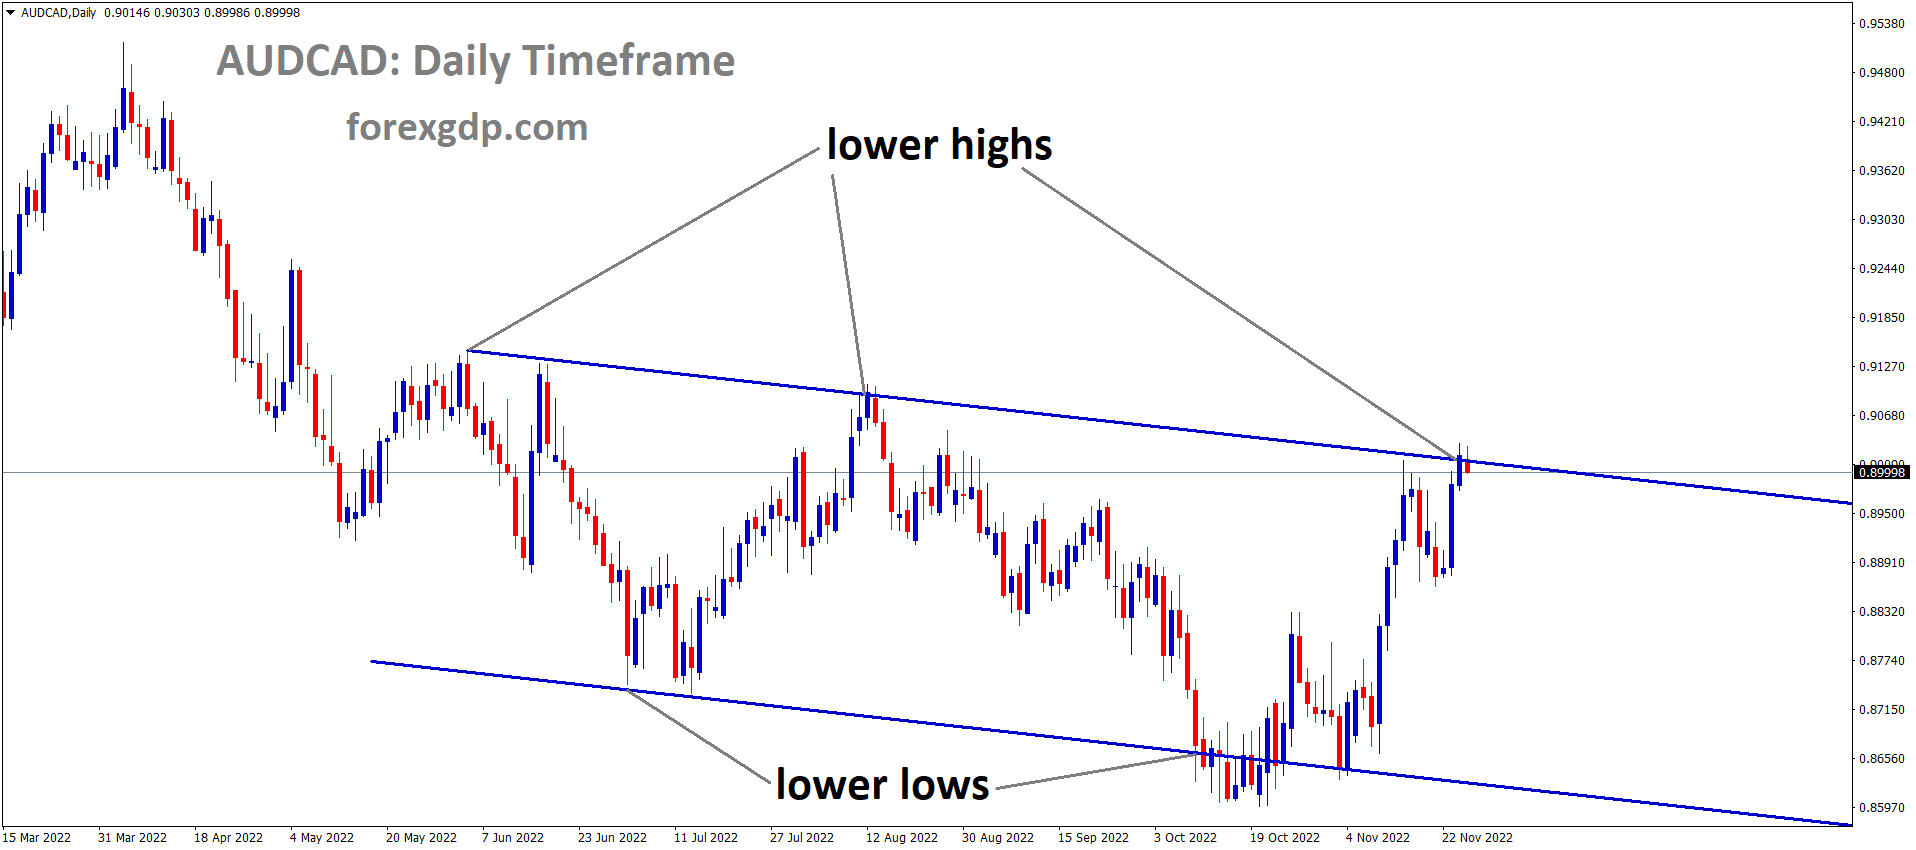 AUDCAD is moving in the Descending channel and the market has reached the lower high area of the channel 7